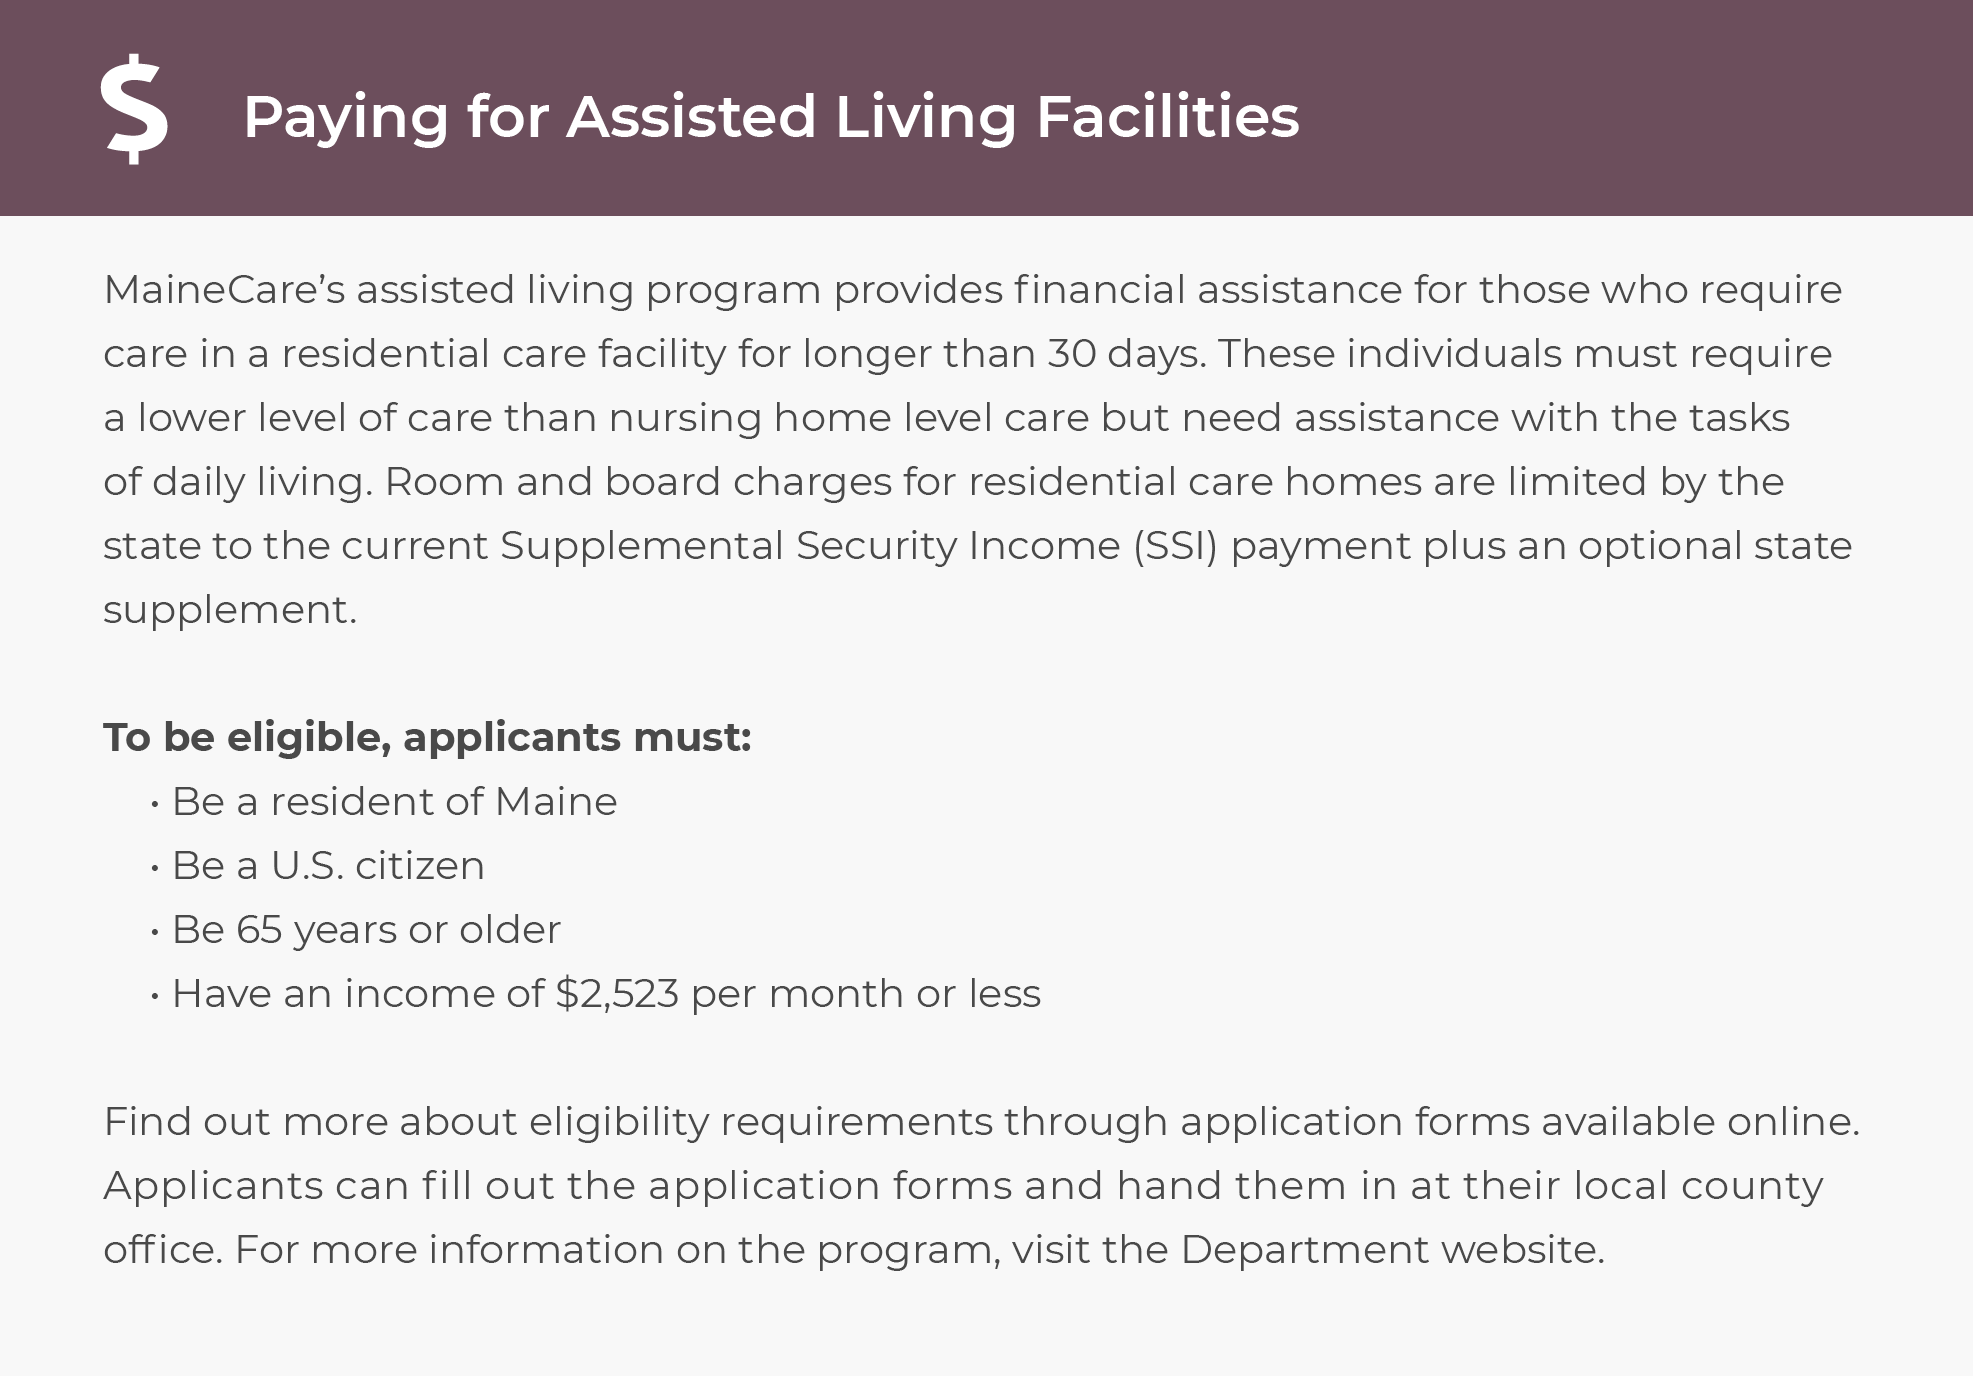 Paying for Assisted Living in Maine